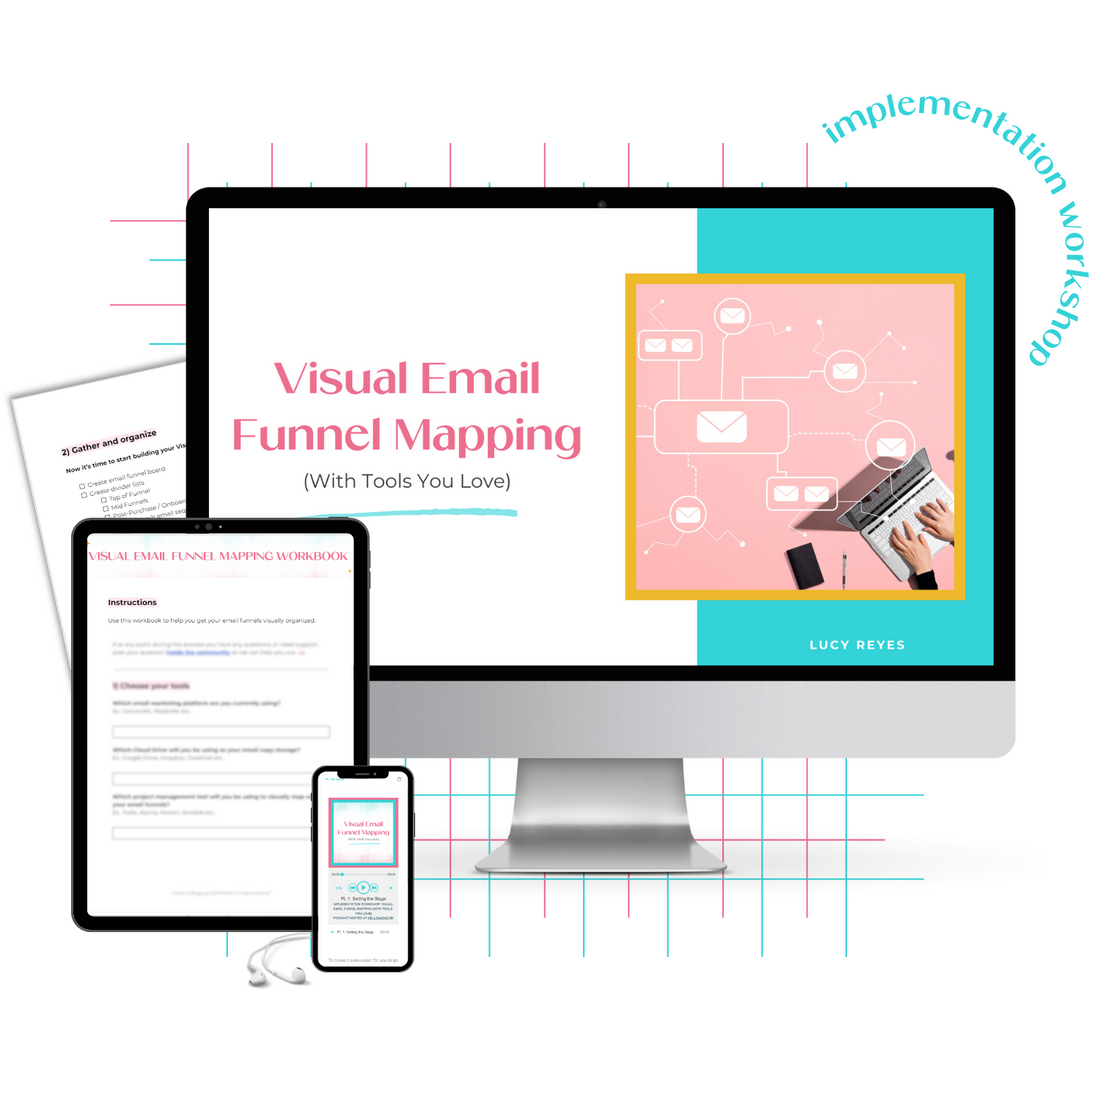 A monitor mockup displaying the Implementation Workshop on Visual Email Funnel Mapping (With Tools You Love).